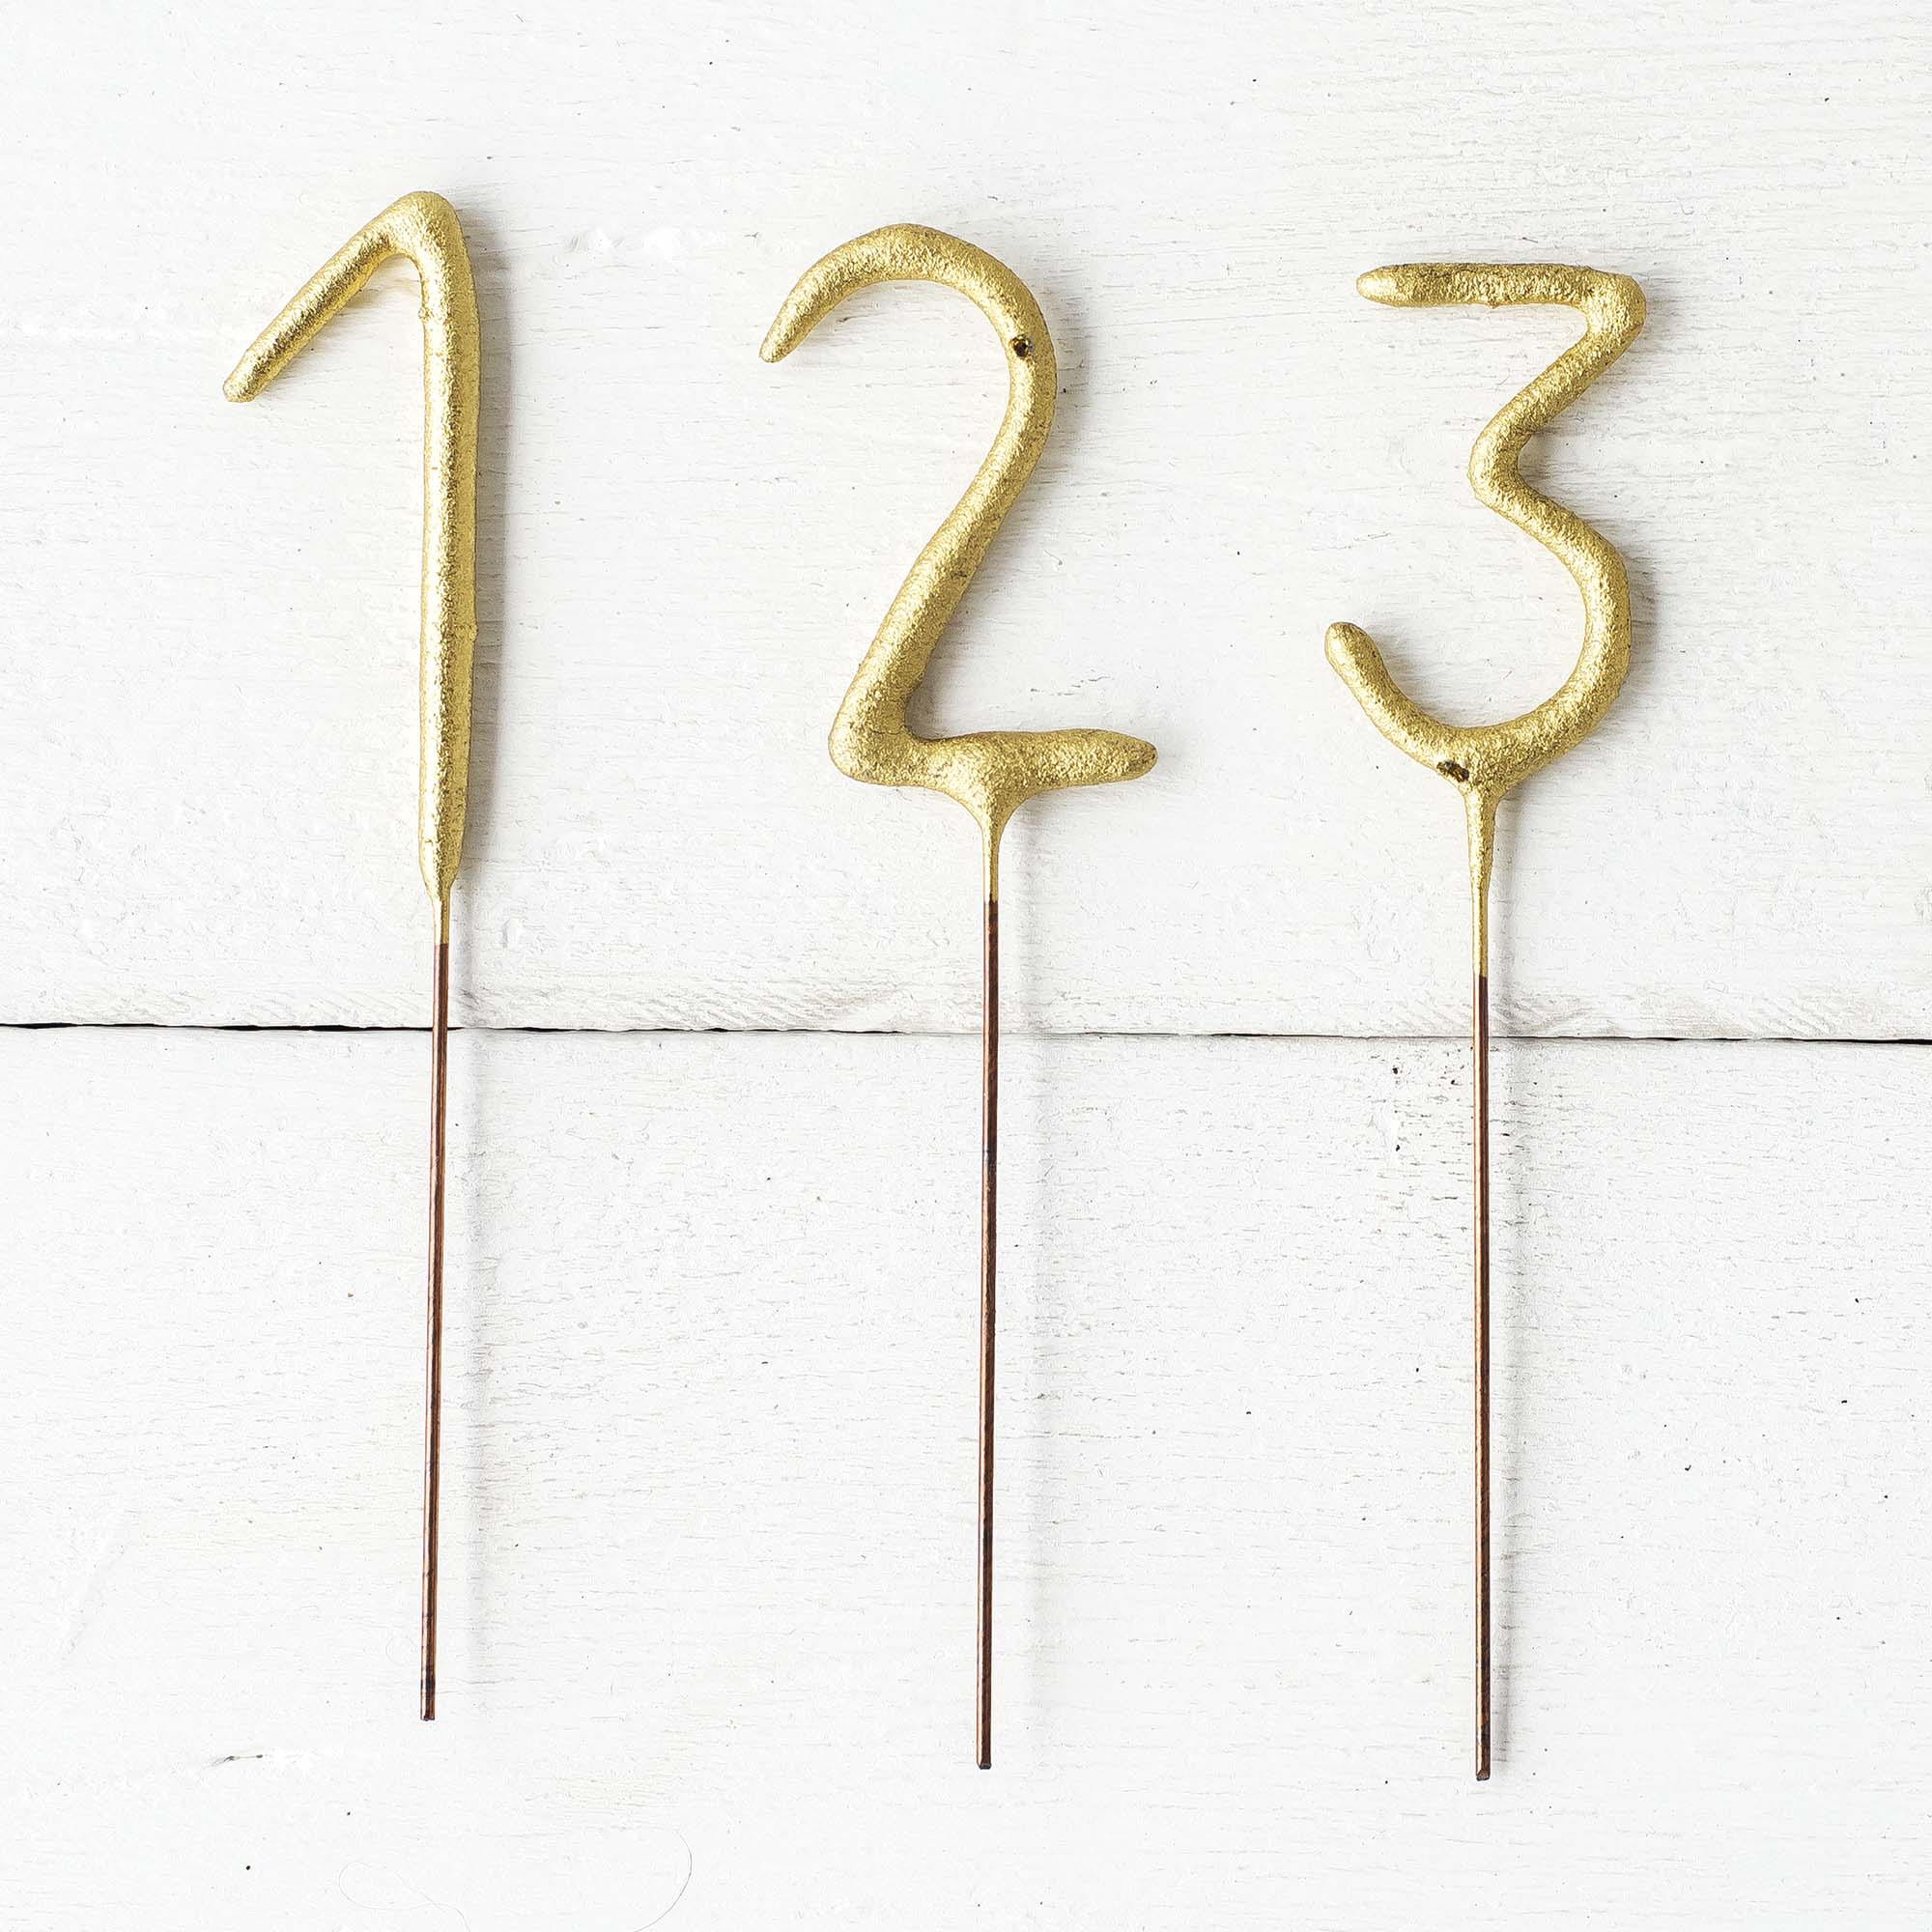 Three Tops Malibu Gold Number Cake Topper Sparklers sticks on a wooden surface, instantly transforming any celebration into an elegant affair. These 4&quot; tall decorations capture attention with a sparkling golden finish.